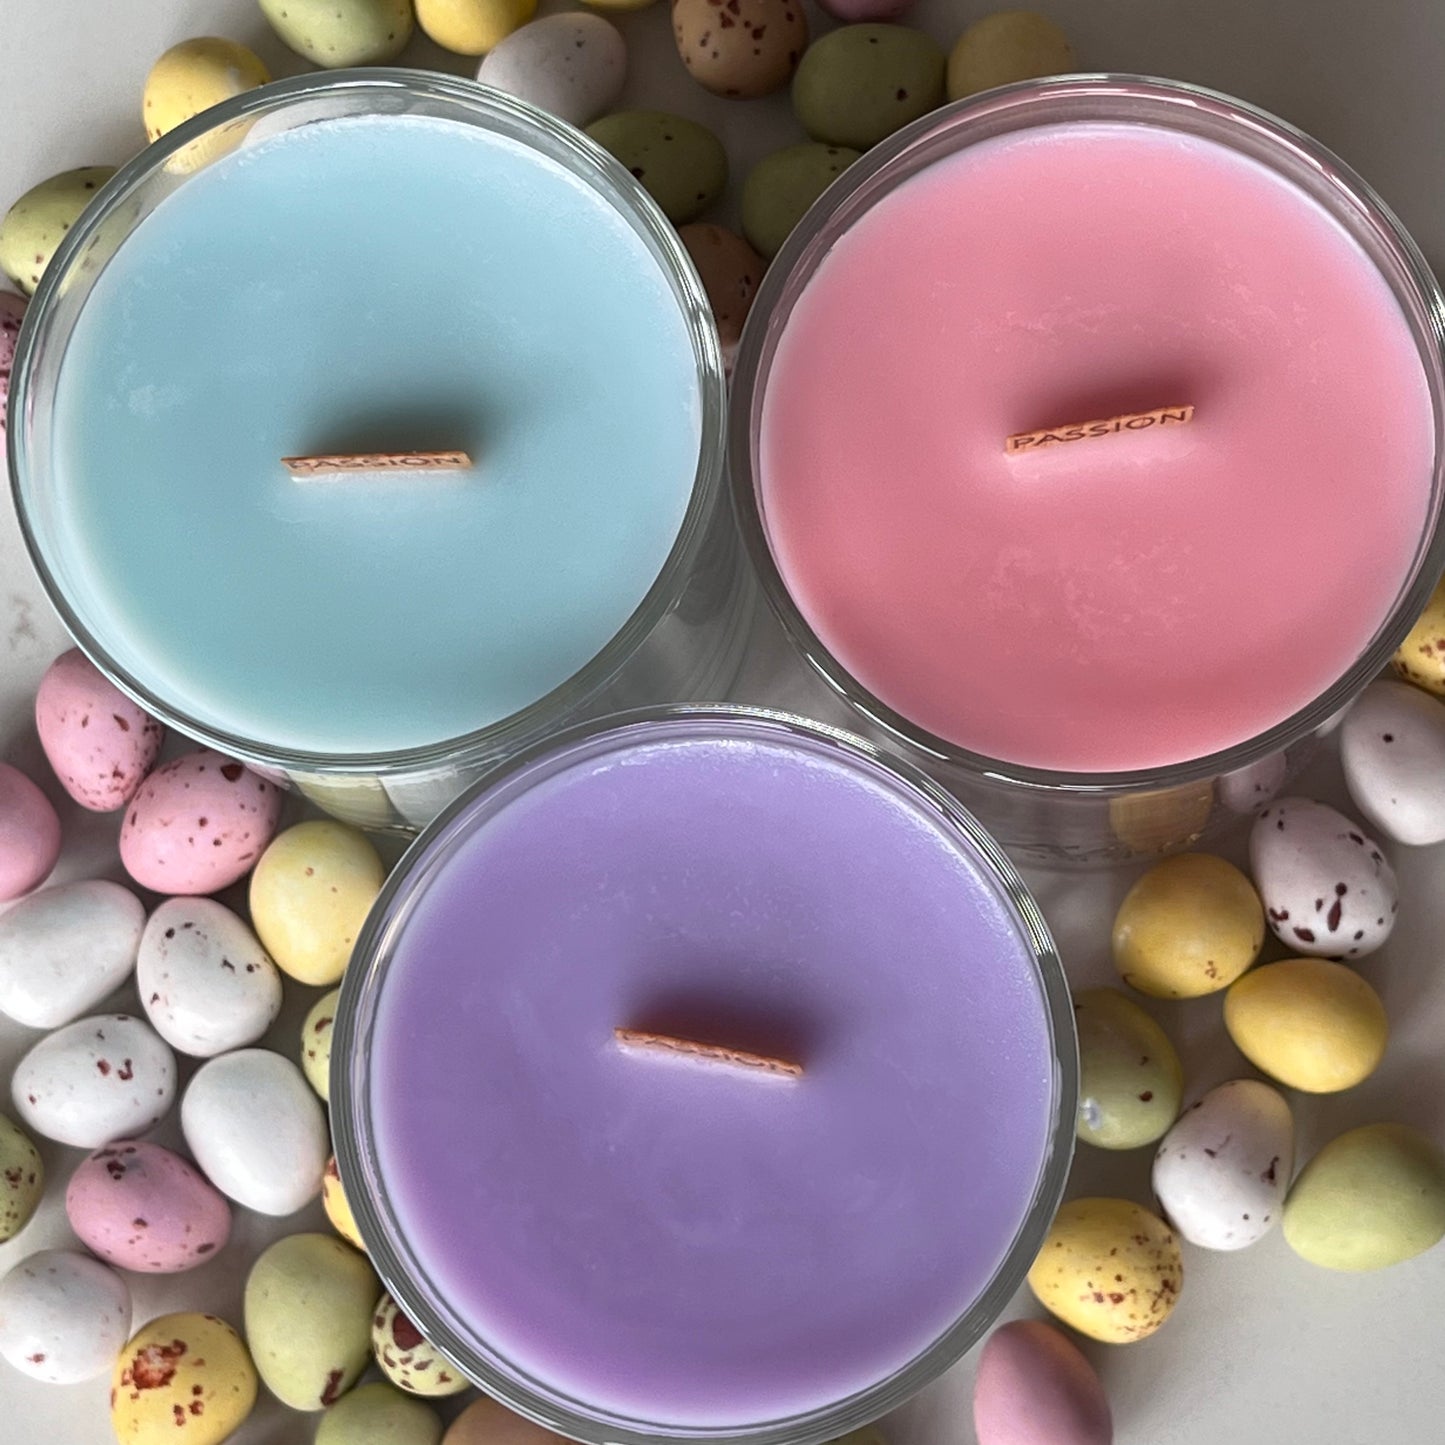 Easter eggs - candle with wooden wick